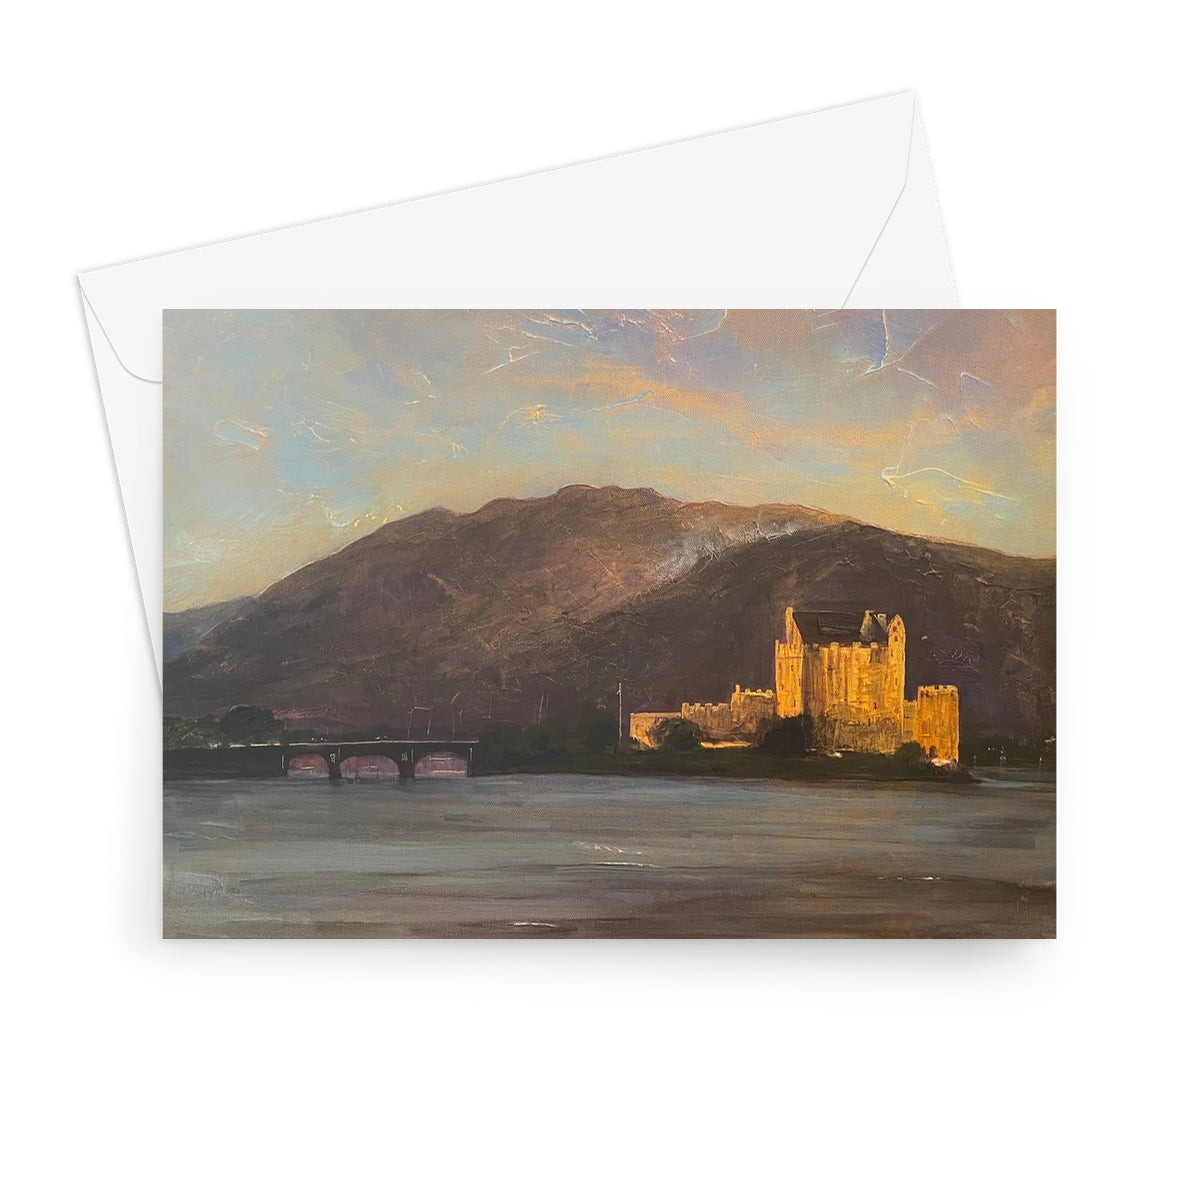 Eilean Donan Castle Art Gifts Greeting Card-Greetings Cards-Historic & Iconic Scotland Art Gallery-7"x5"-10 Cards-Paintings, Prints, Homeware, Art Gifts From Scotland By Scottish Artist Kevin Hunter